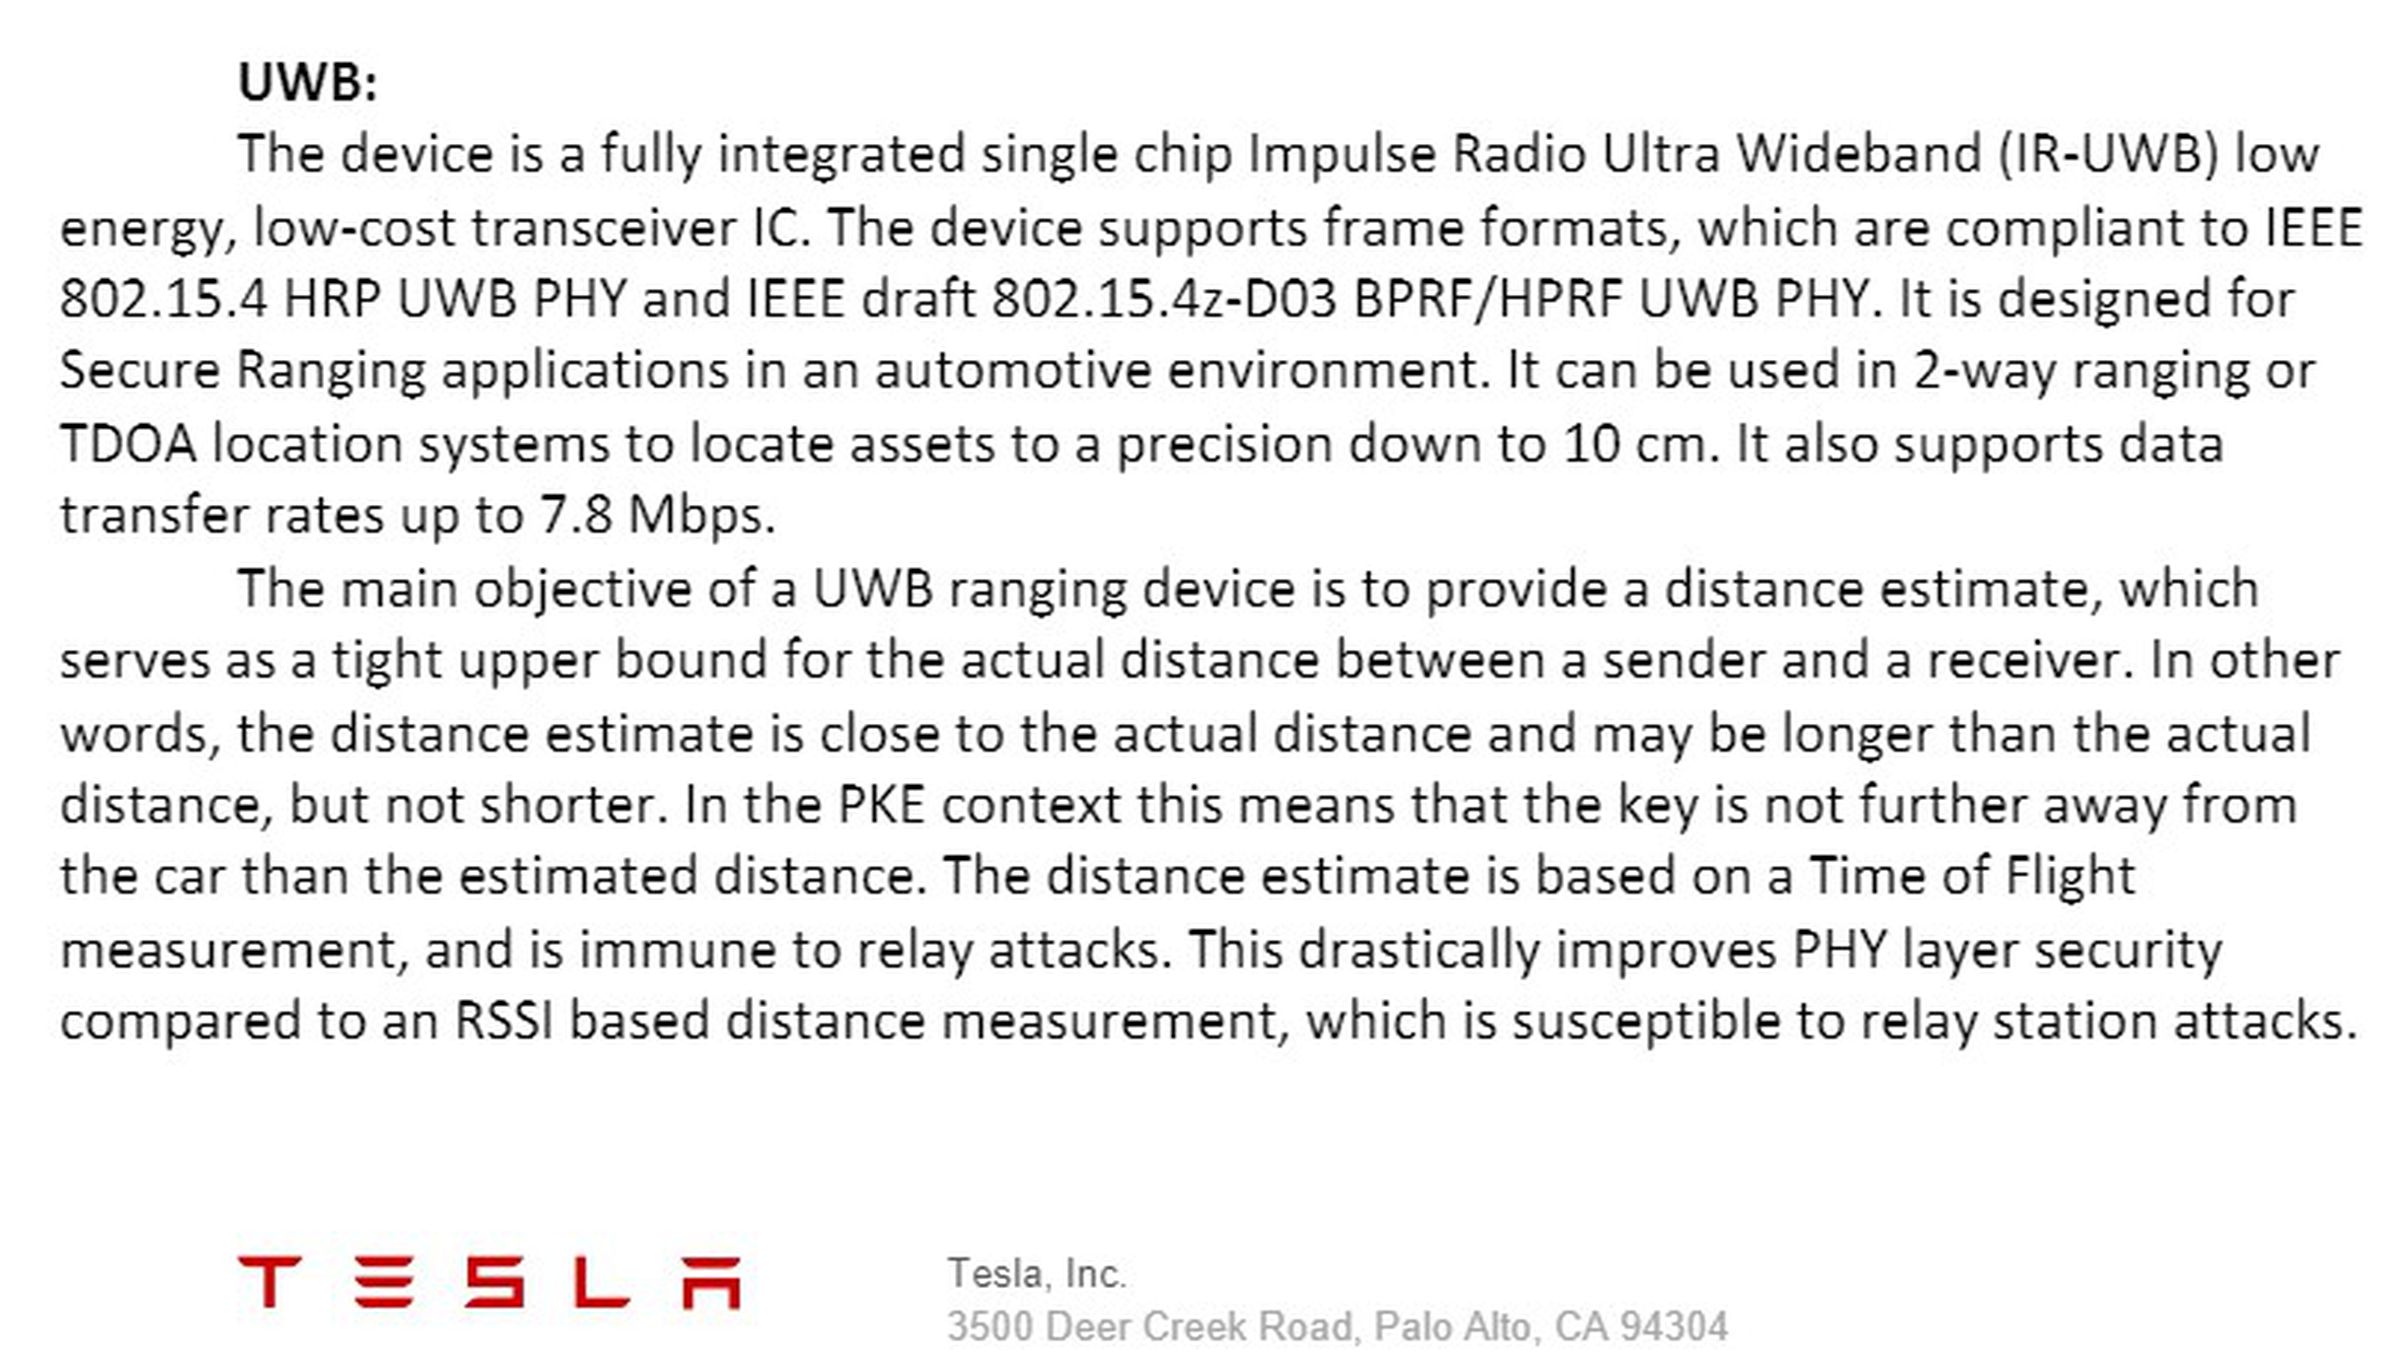 A selection from Tesla’s operational description of the tech.